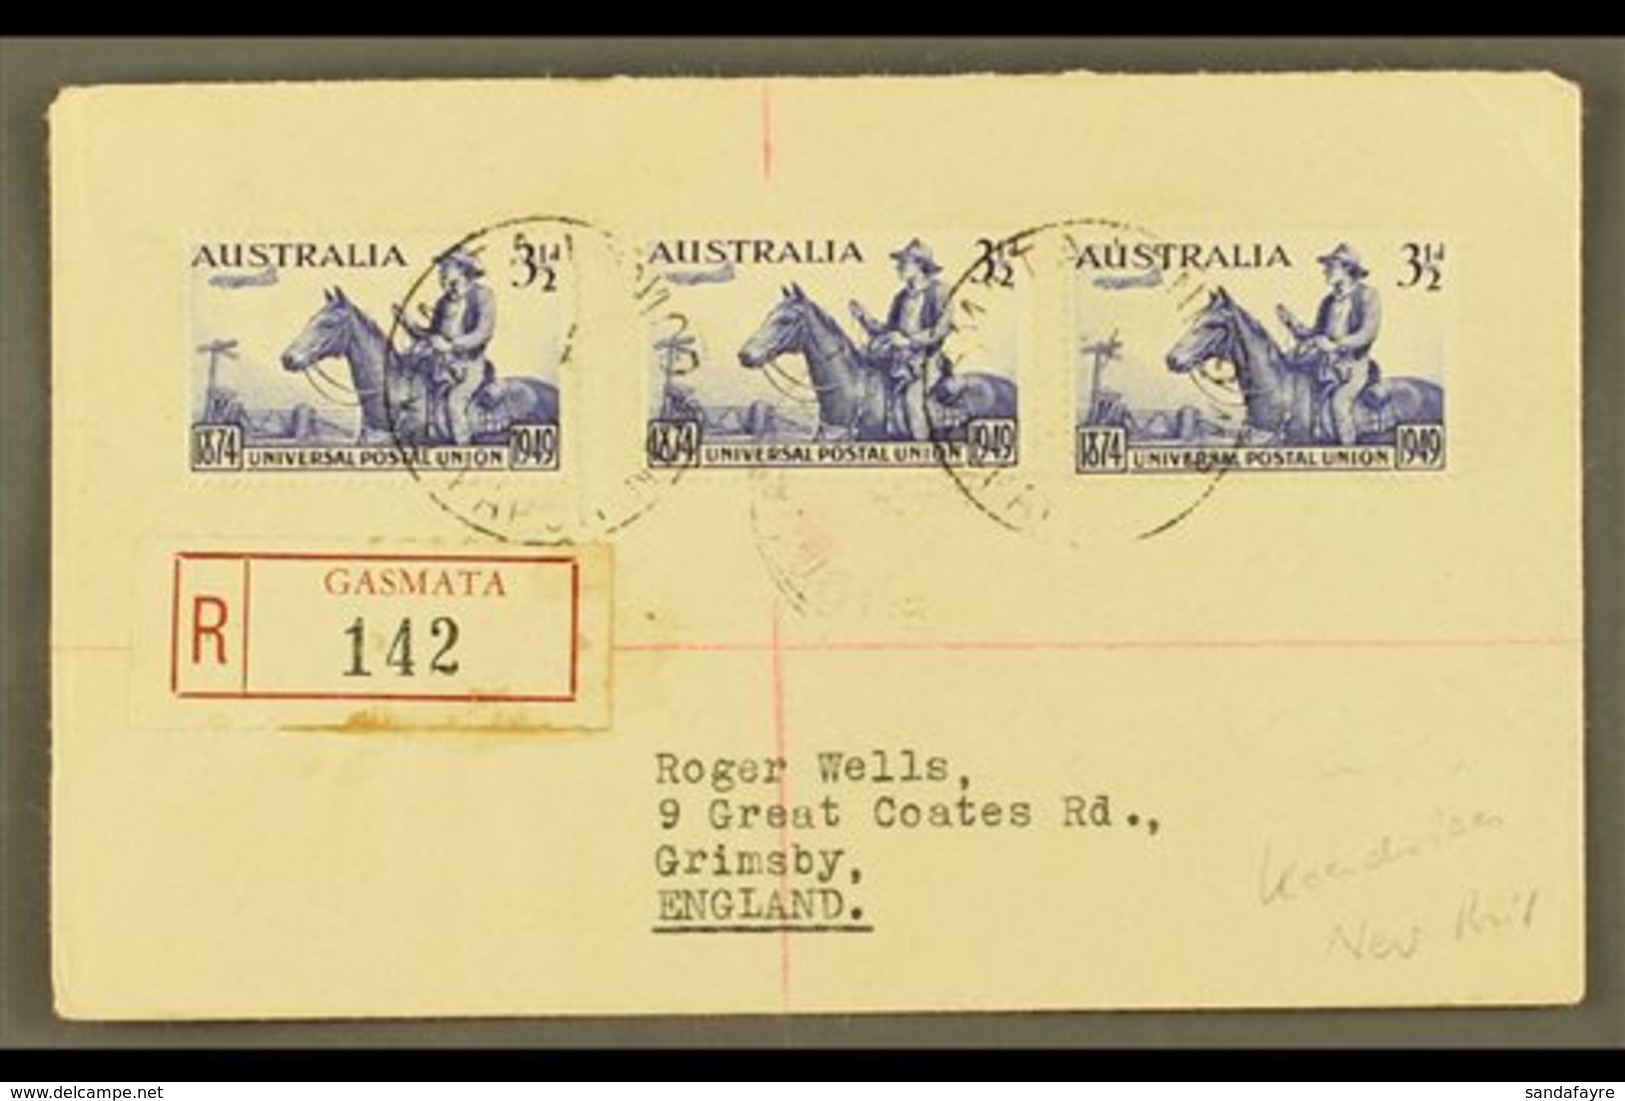 1950 (May) Neat "Roger Wells" Registered Cover To England, Bearing UPU 3½d X3, Tied GASMATA Cds's, Rabaul And Sydney Tra - Papouasie-Nouvelle-Guinée